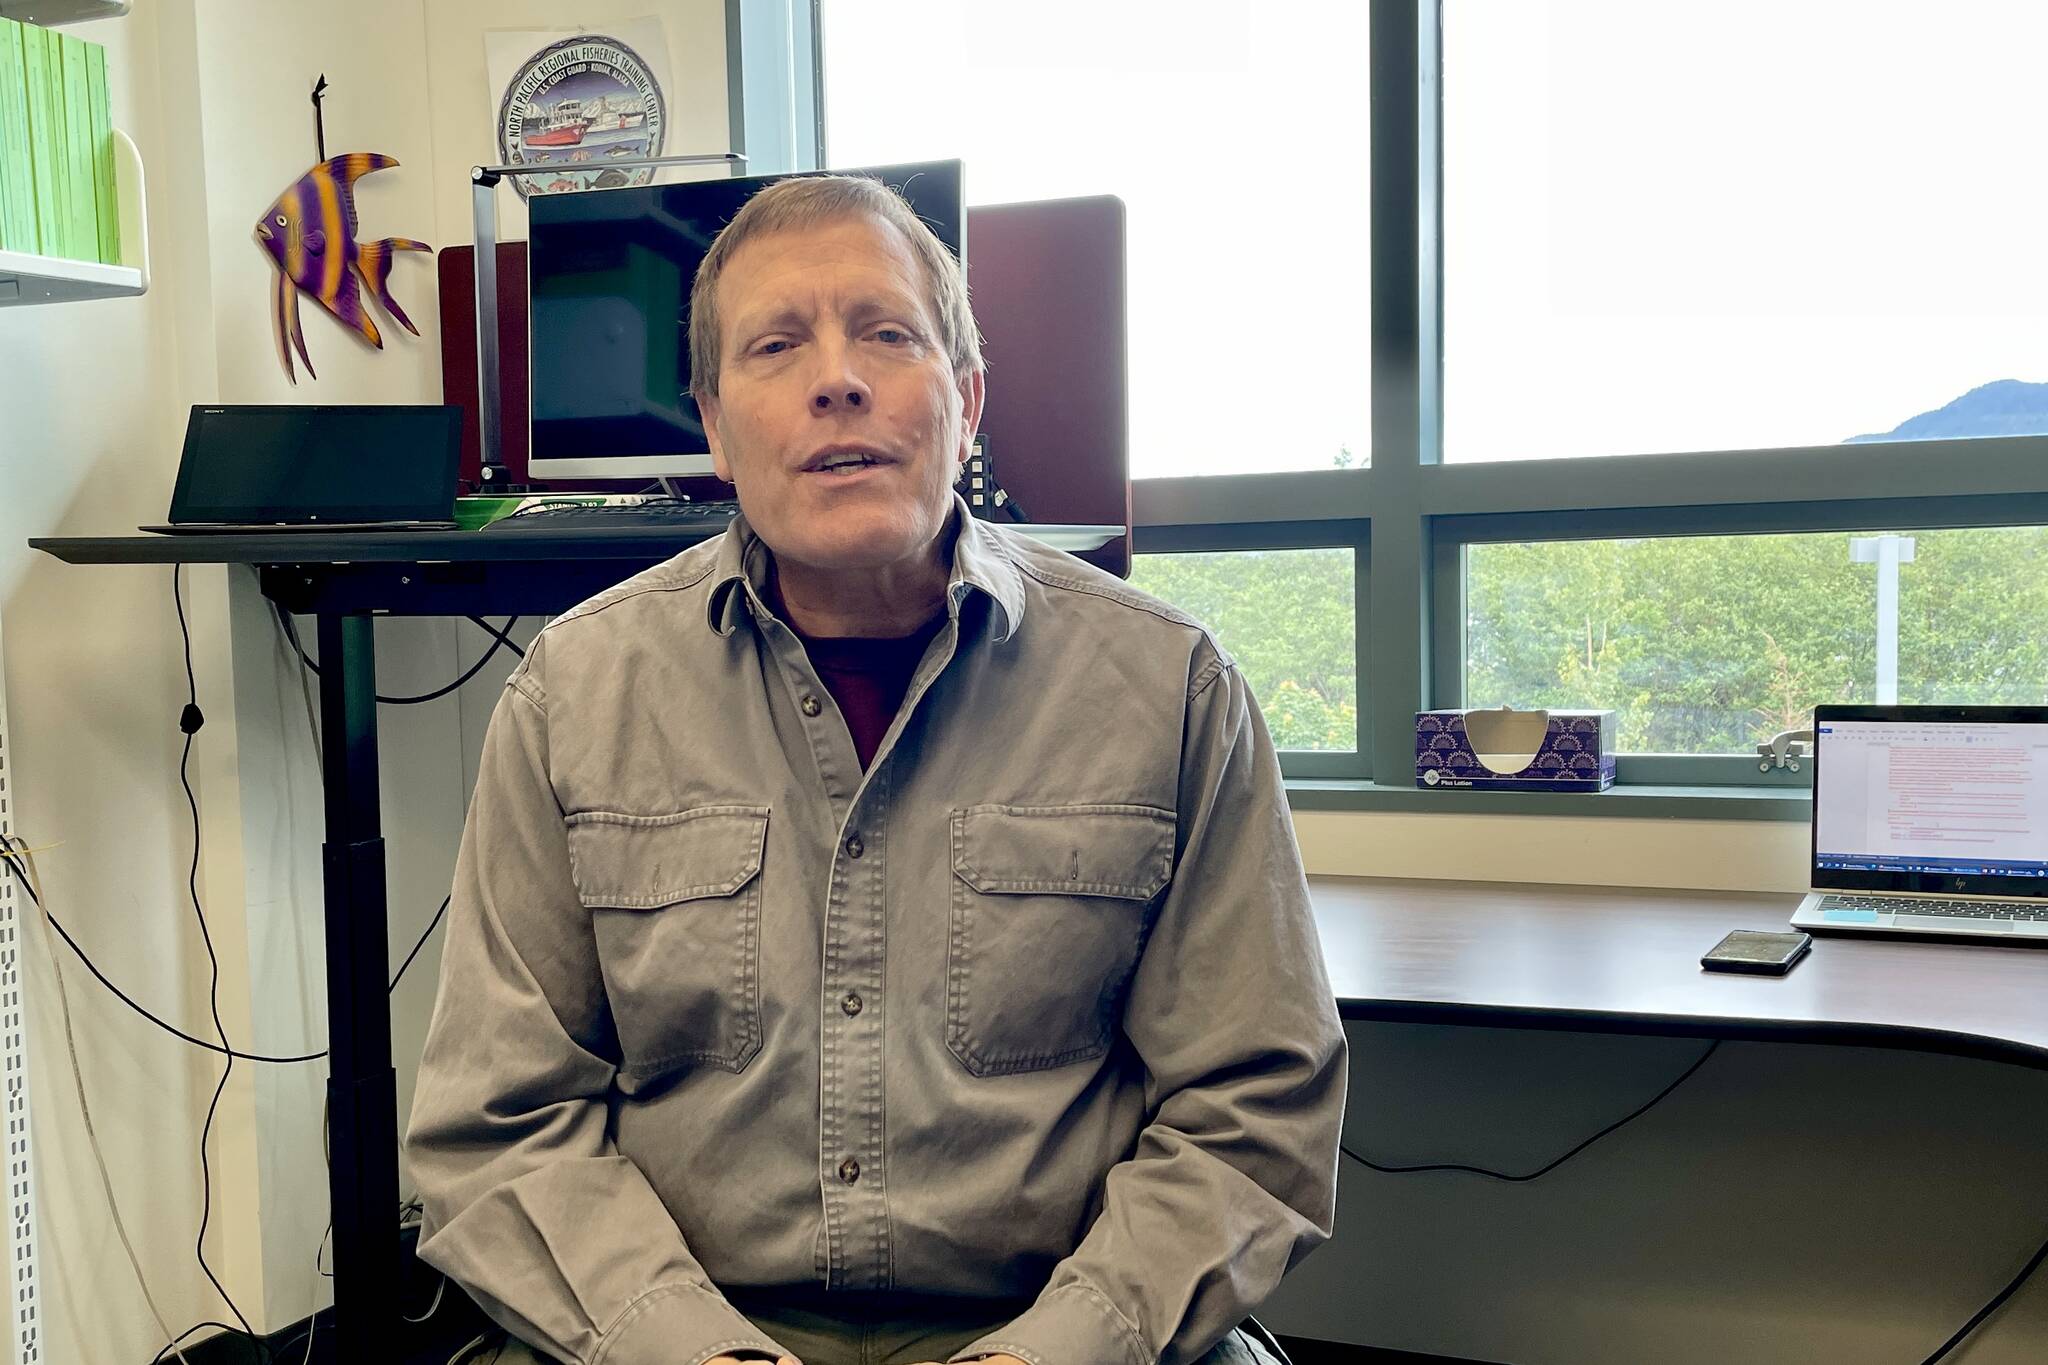 Keith Criddle, the Ted Stevens Professor of Marine Policy, talks about the new Master of Marine Policy program offered by the University of Alaska Fairbanks. (Michael S. Lockett / Juneau Empire)